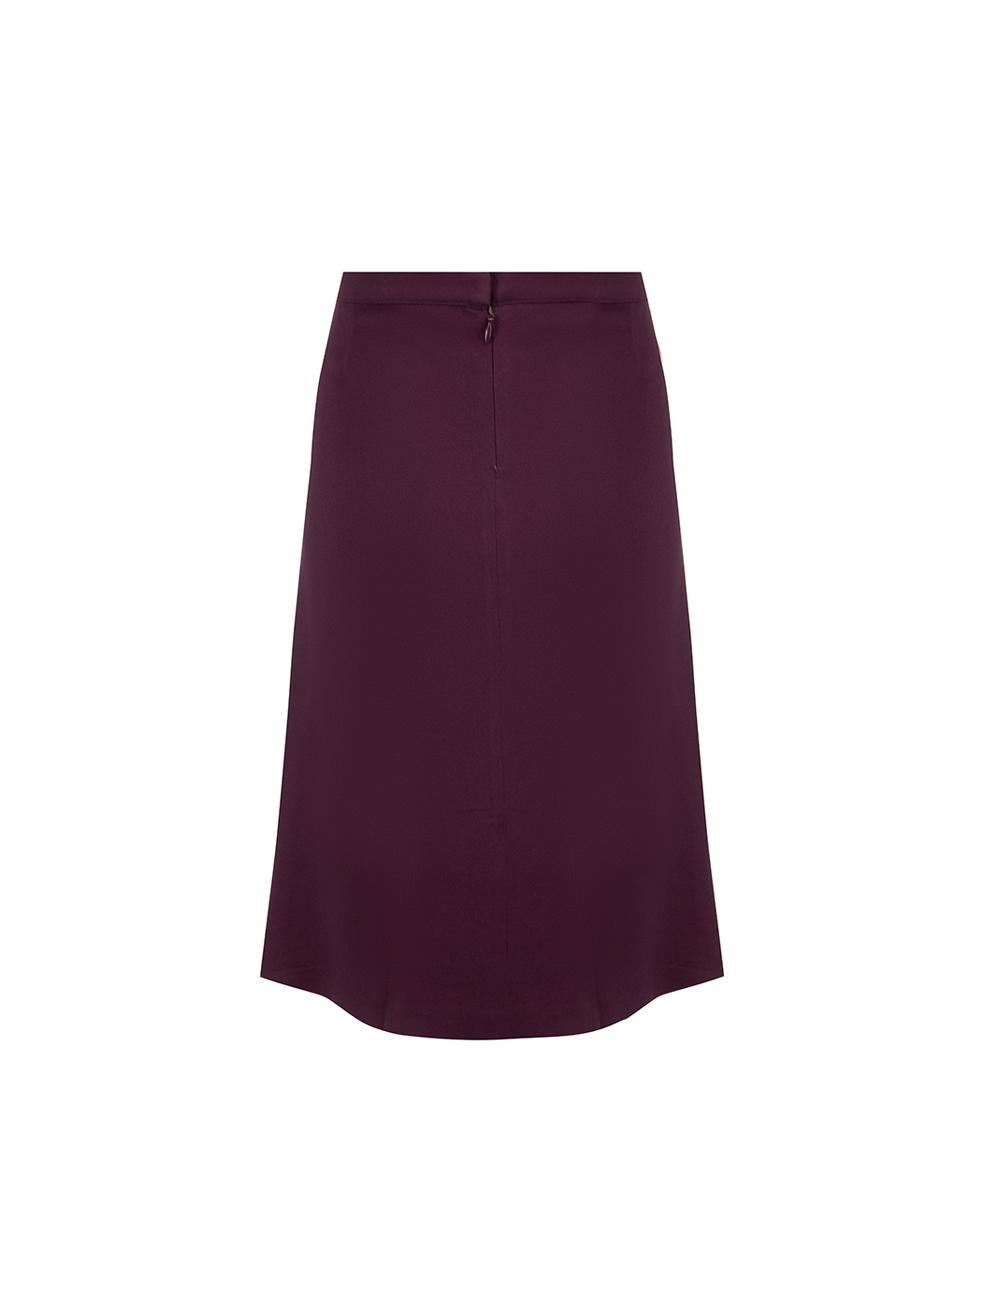 Aubergine Ruched Detail Skirt Size L In Good Condition For Sale In London, GB